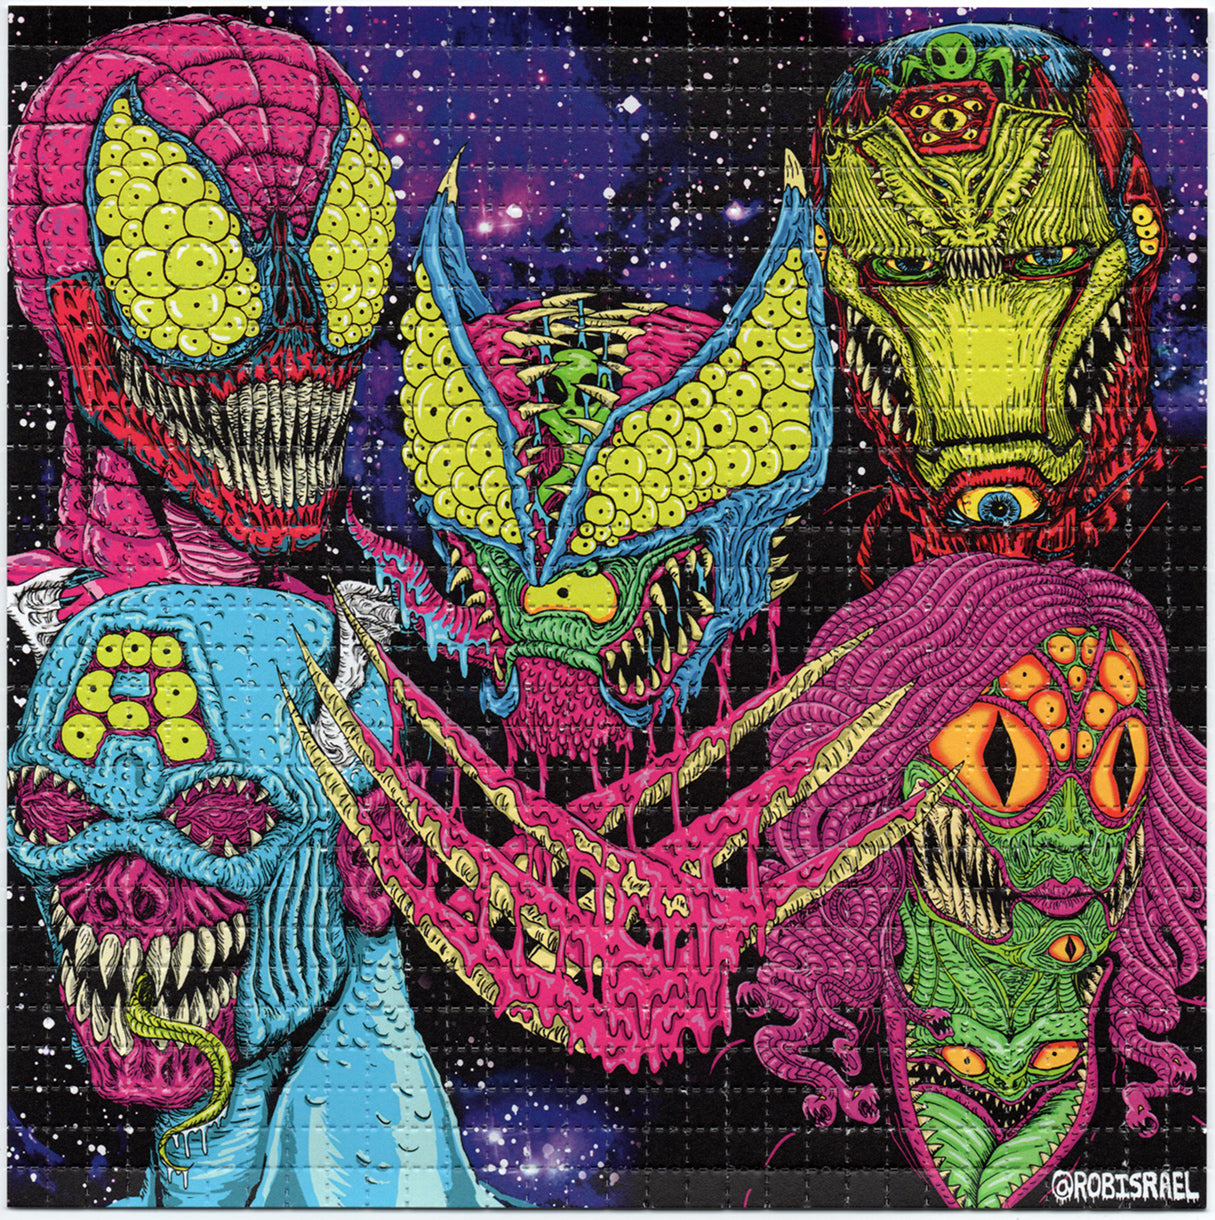 Heroes by Rob Israel Limited Edition LSD blotter art print